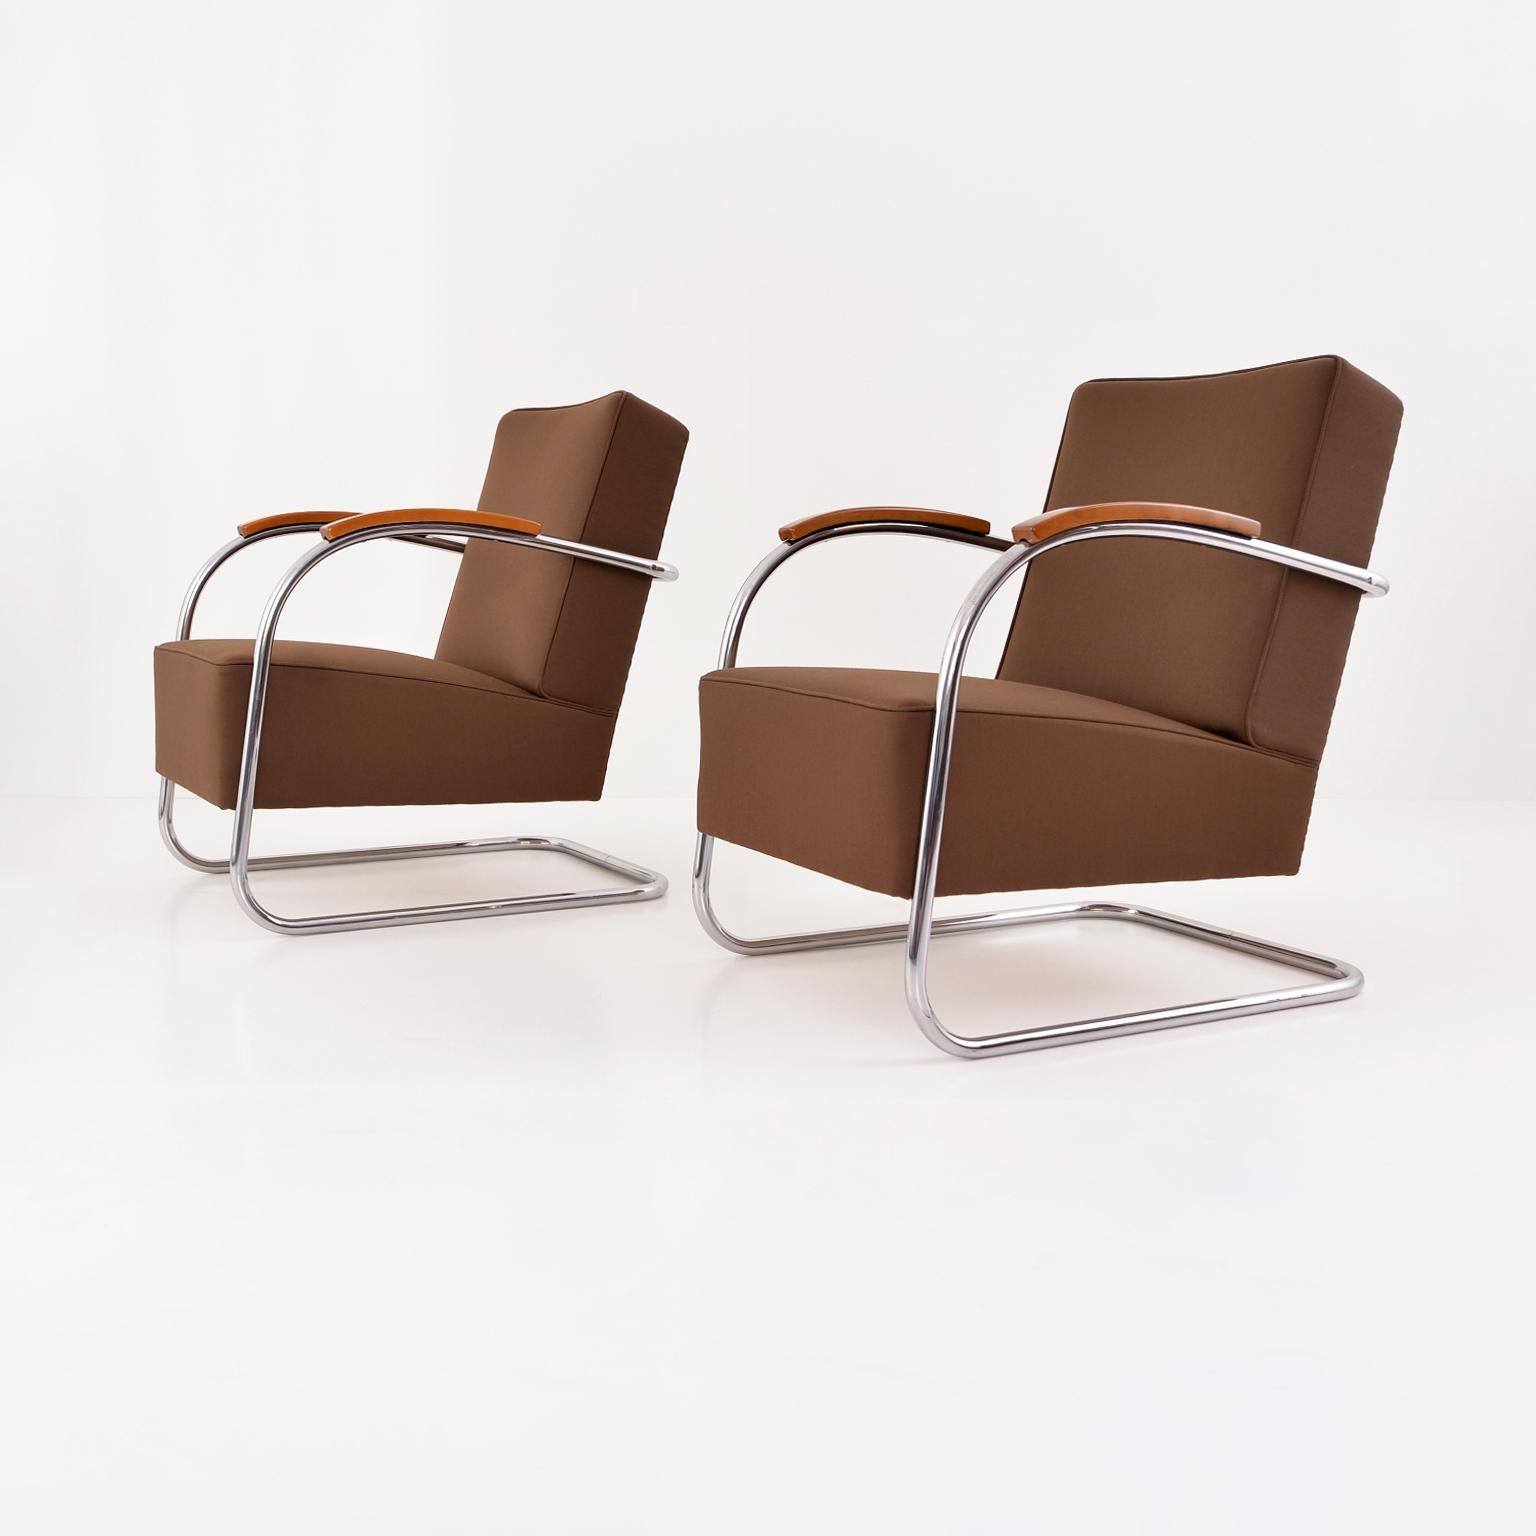 Art Déco Streamline tubular steel cantilever armchairs manufactured by Mücke-Melder, circa. 1930

This armchairs are restored on request and available in different amounts. 
Delivery time 6-7 weeks.